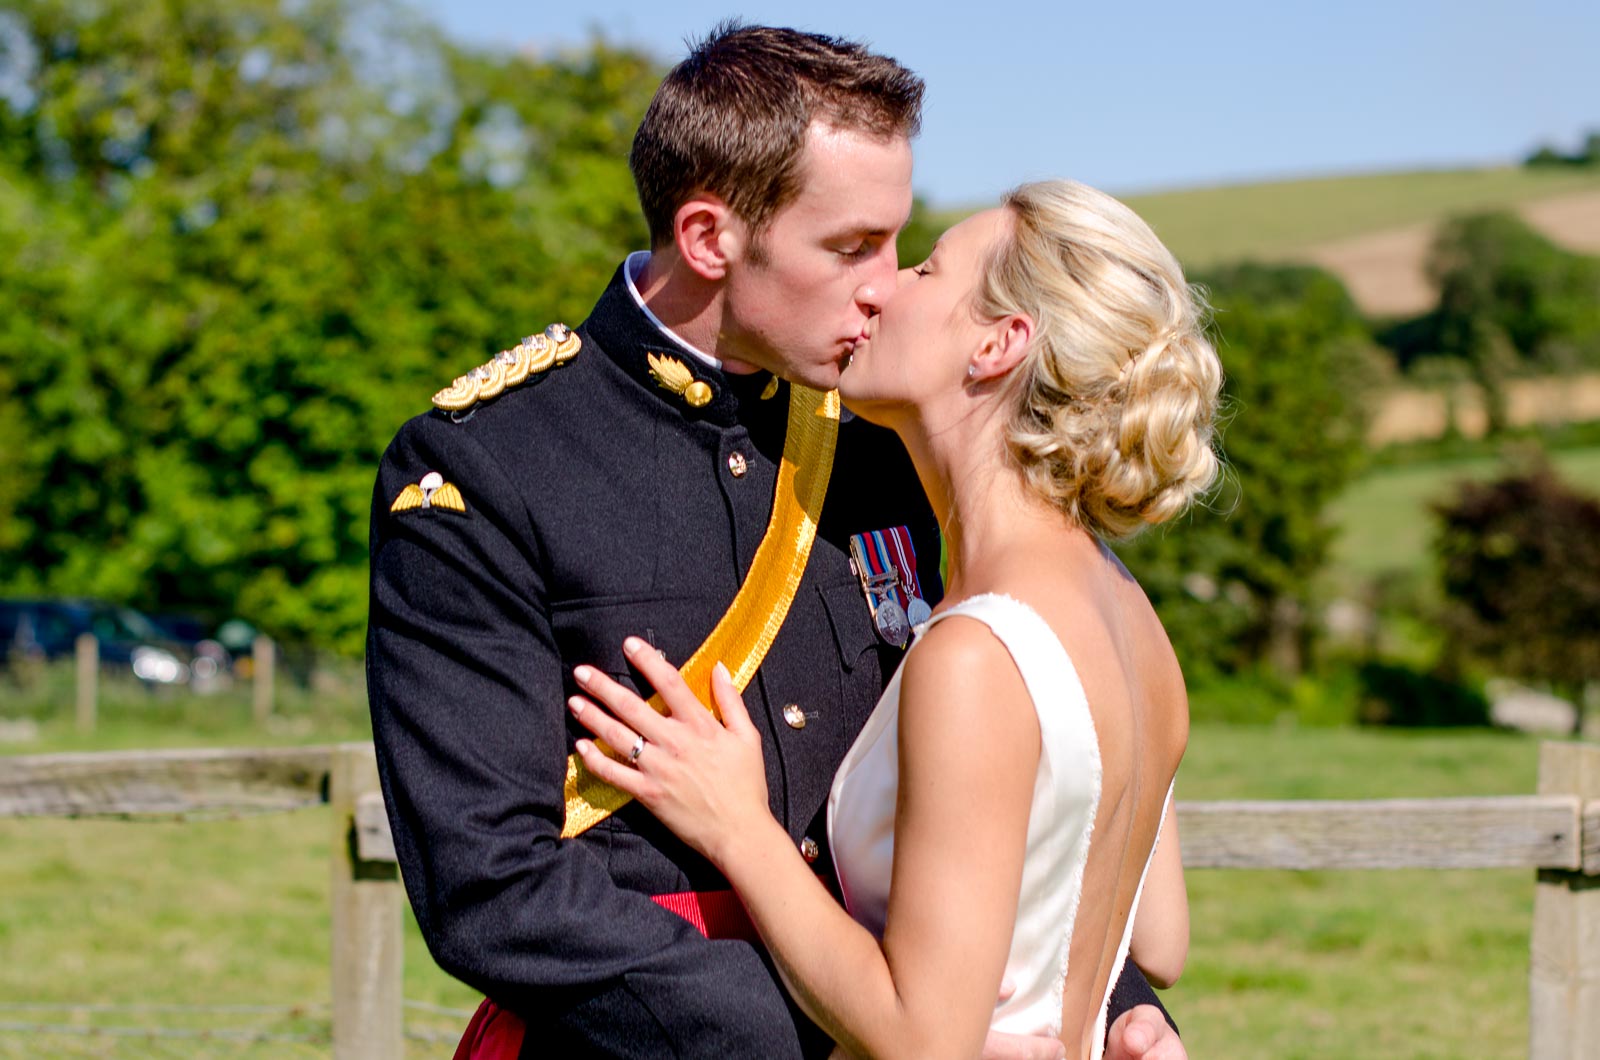 Rachael and Dan embrace on front of the South Downs during their wedding reception wedding reception at Burpham Village Hall.